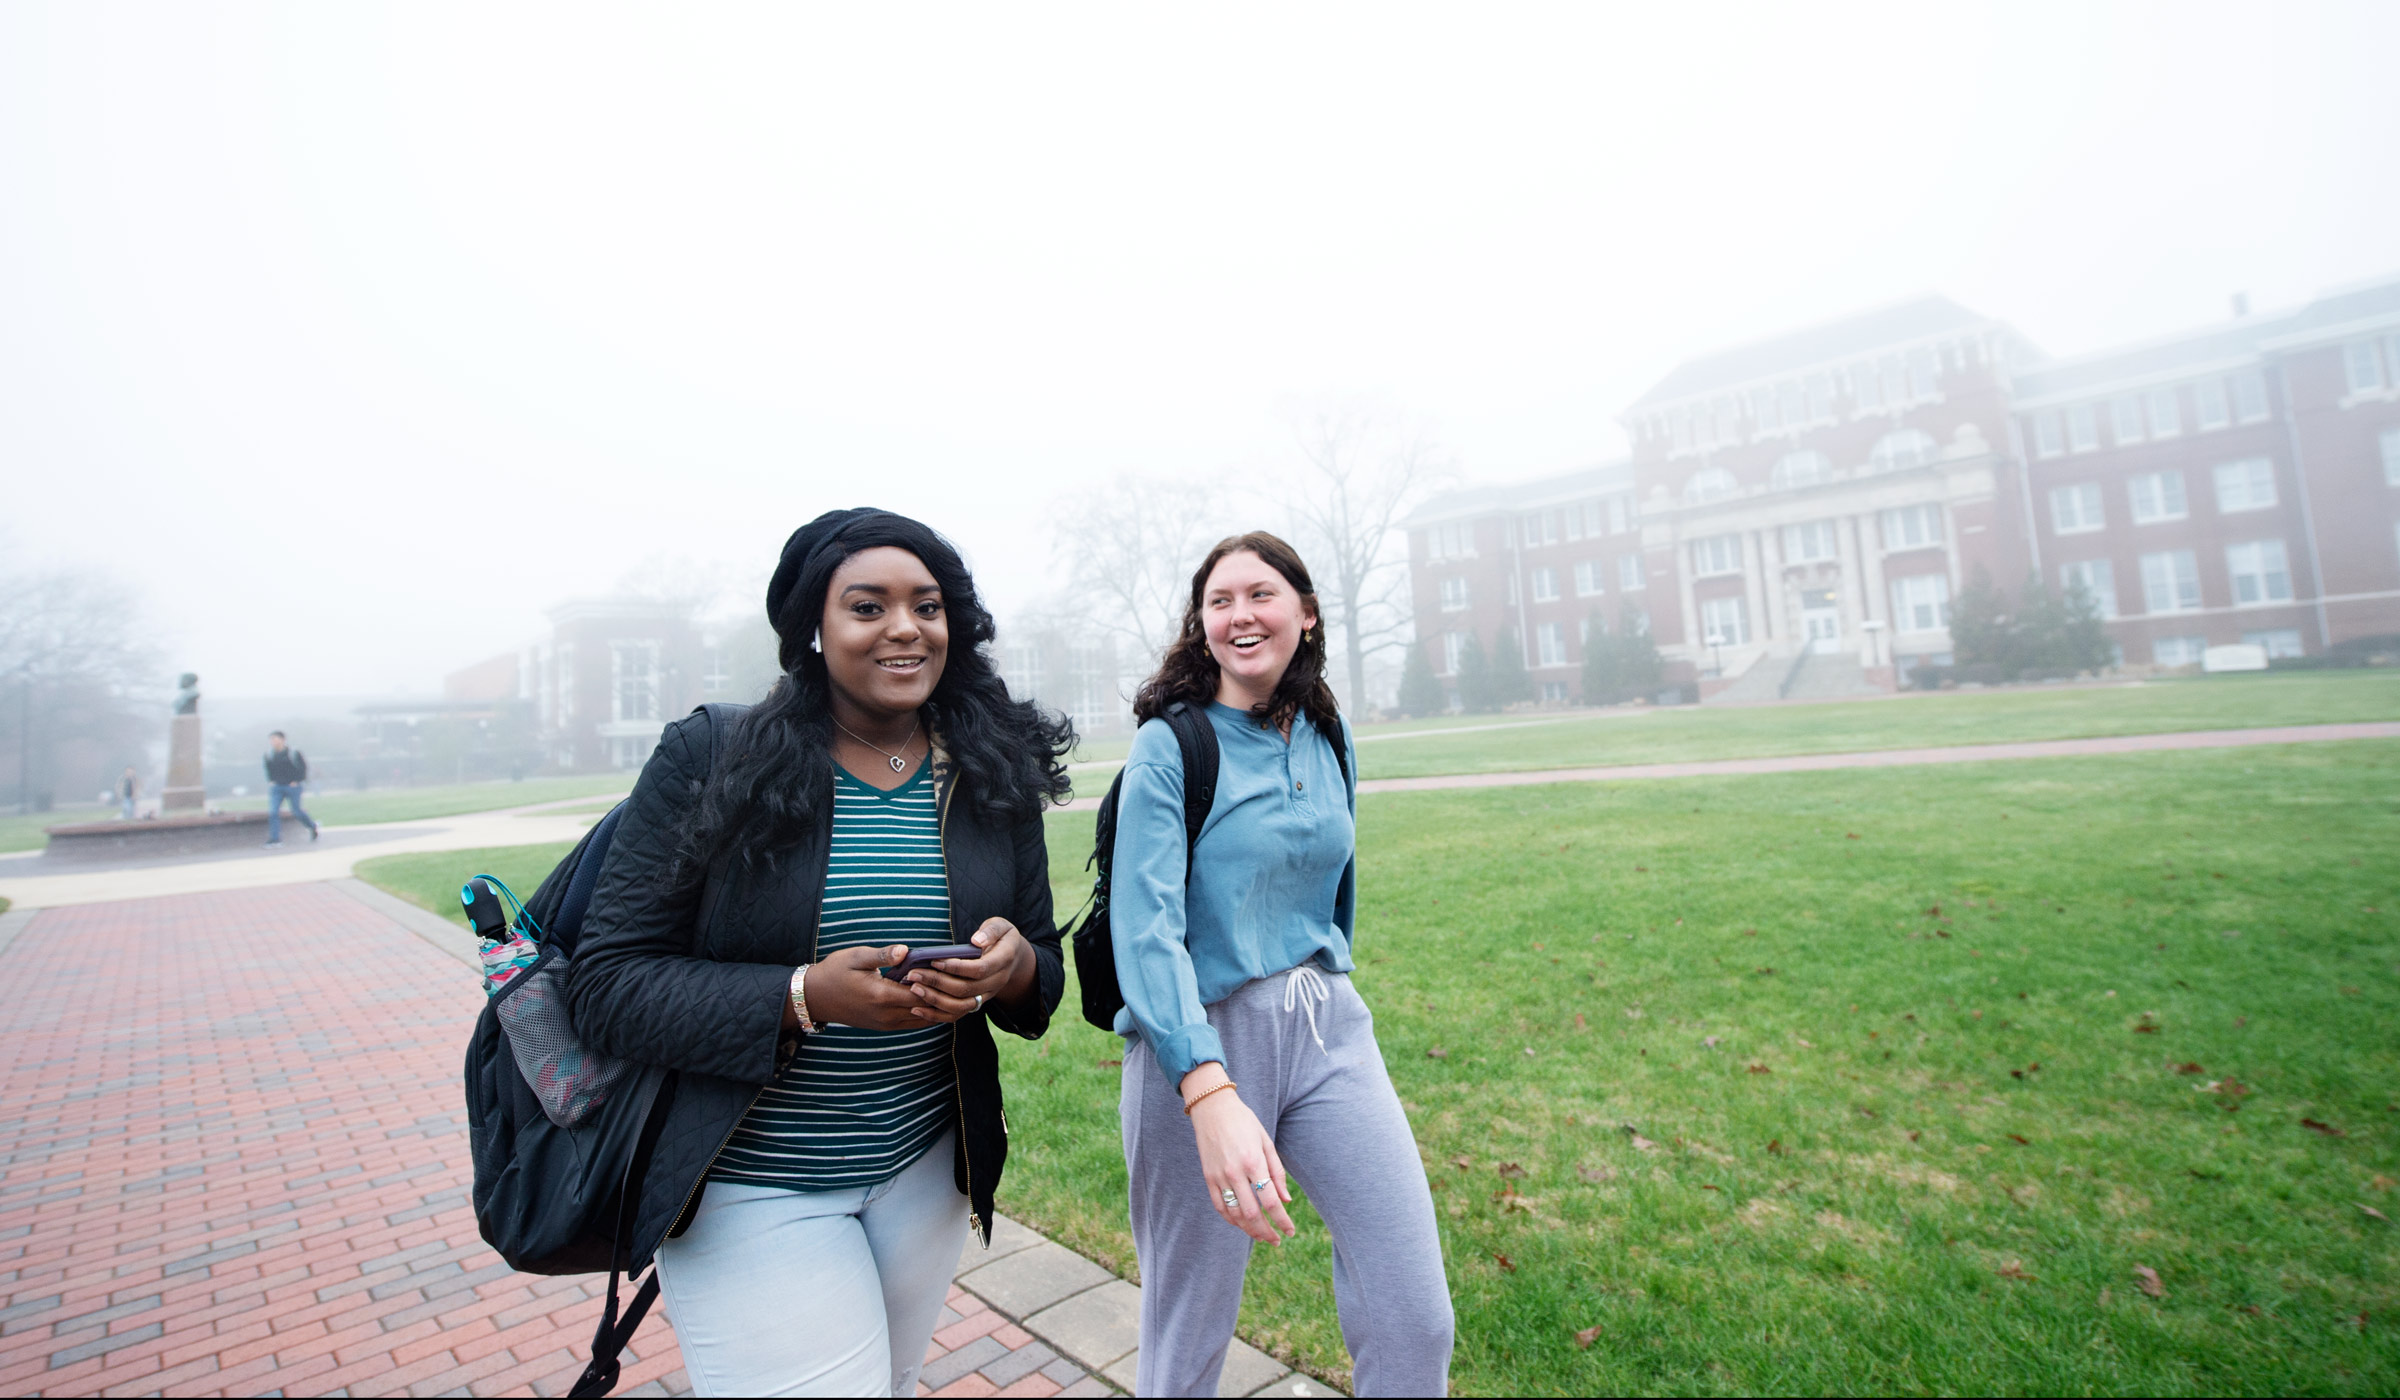 With a foggy Drill Field behind them, students Jaslynn Ware and Bethany Deuel walk to French class together.